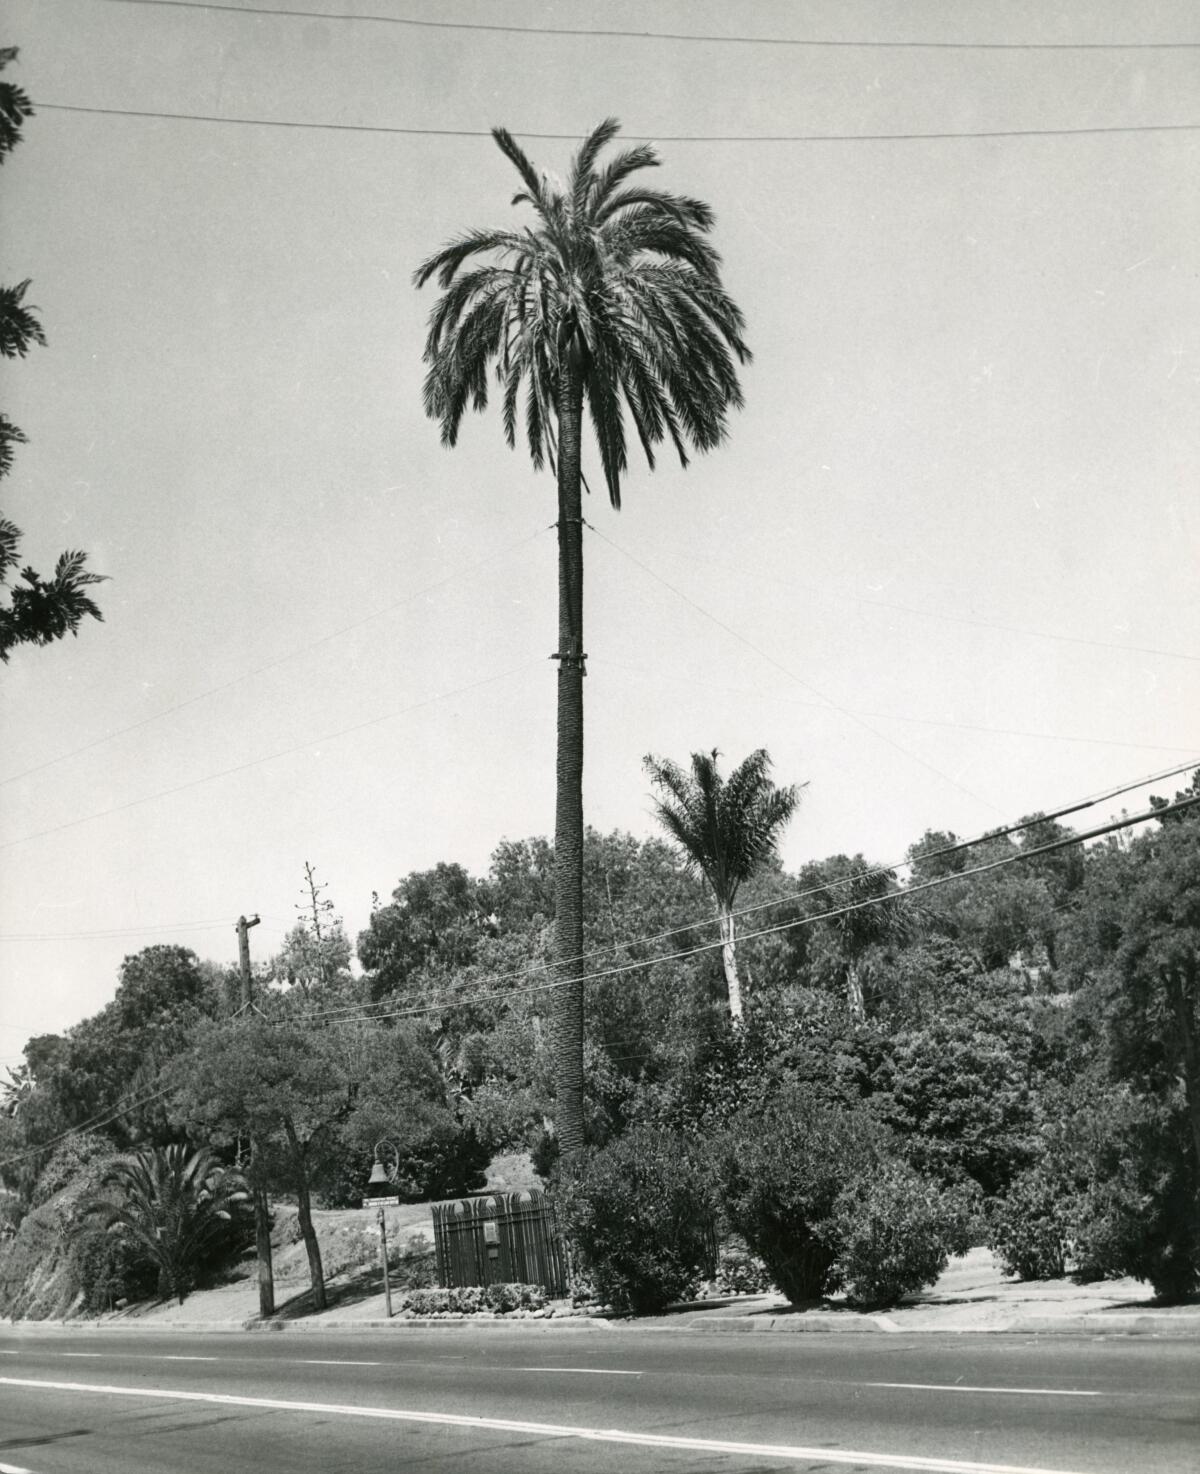 The Serra Palm, photographed in 1952.